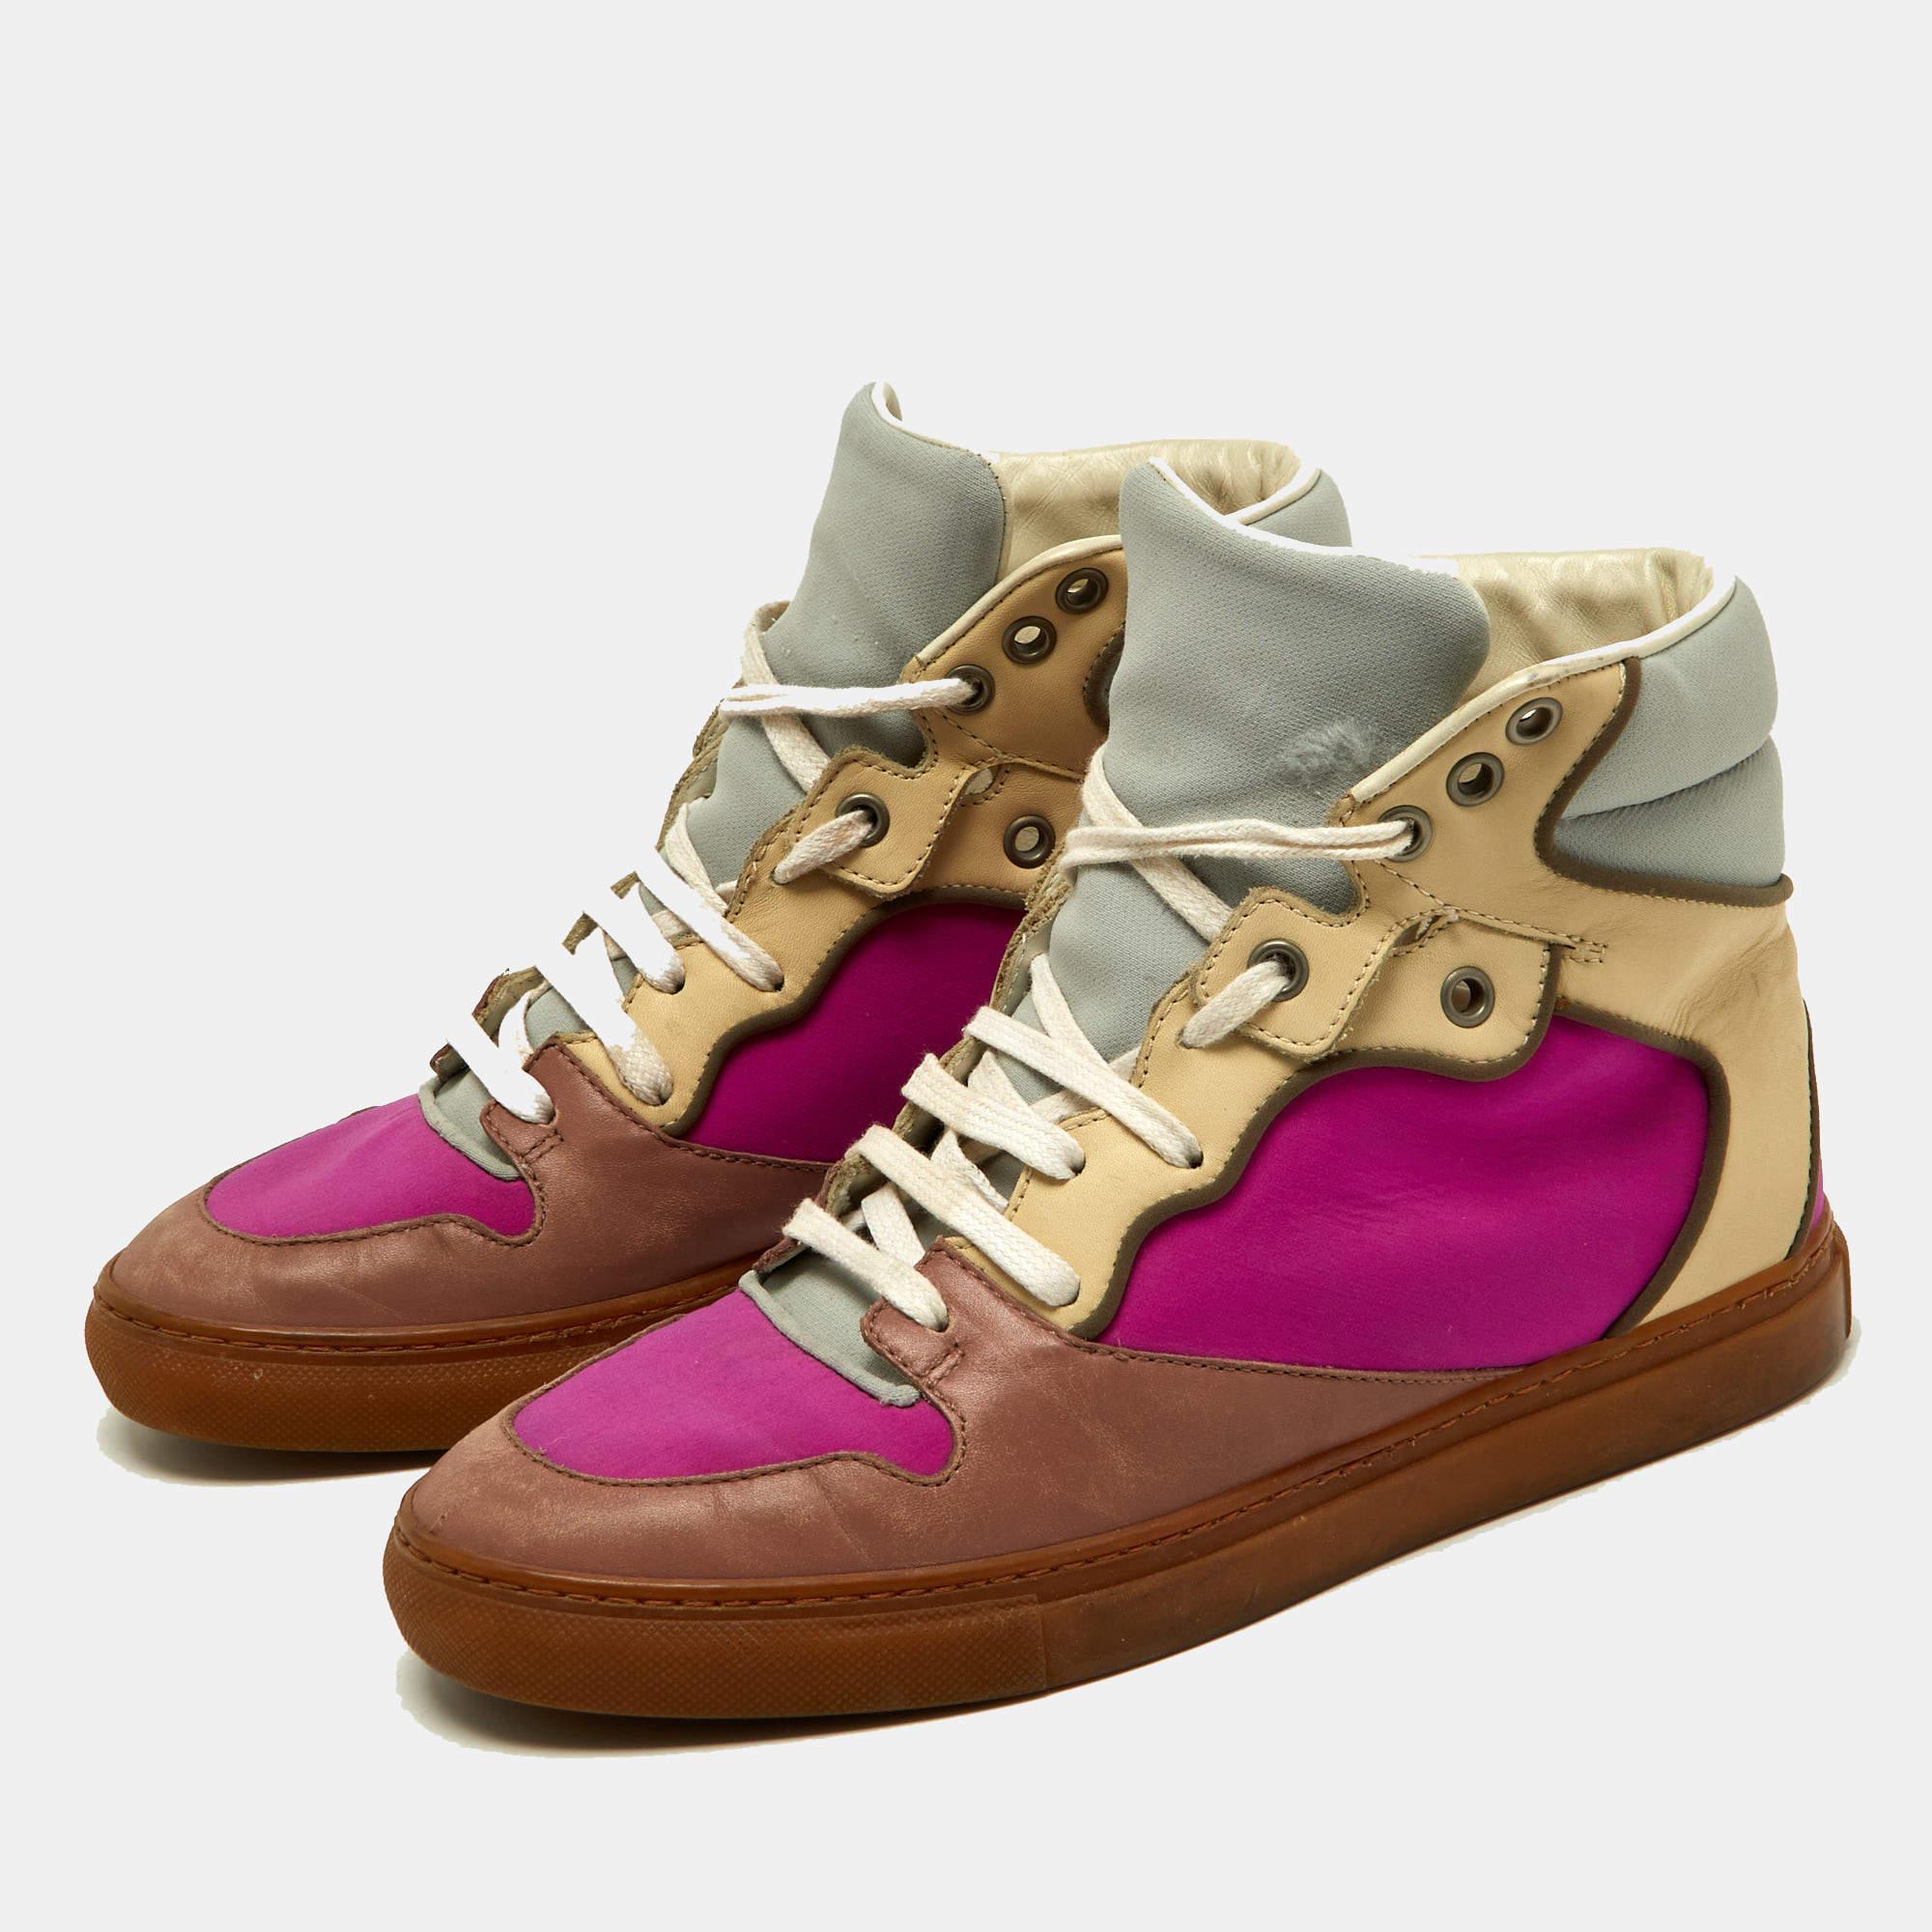 Balenciaga Multicolor Leather And Fabric High Top Sneakers Size 37 For Sale 1